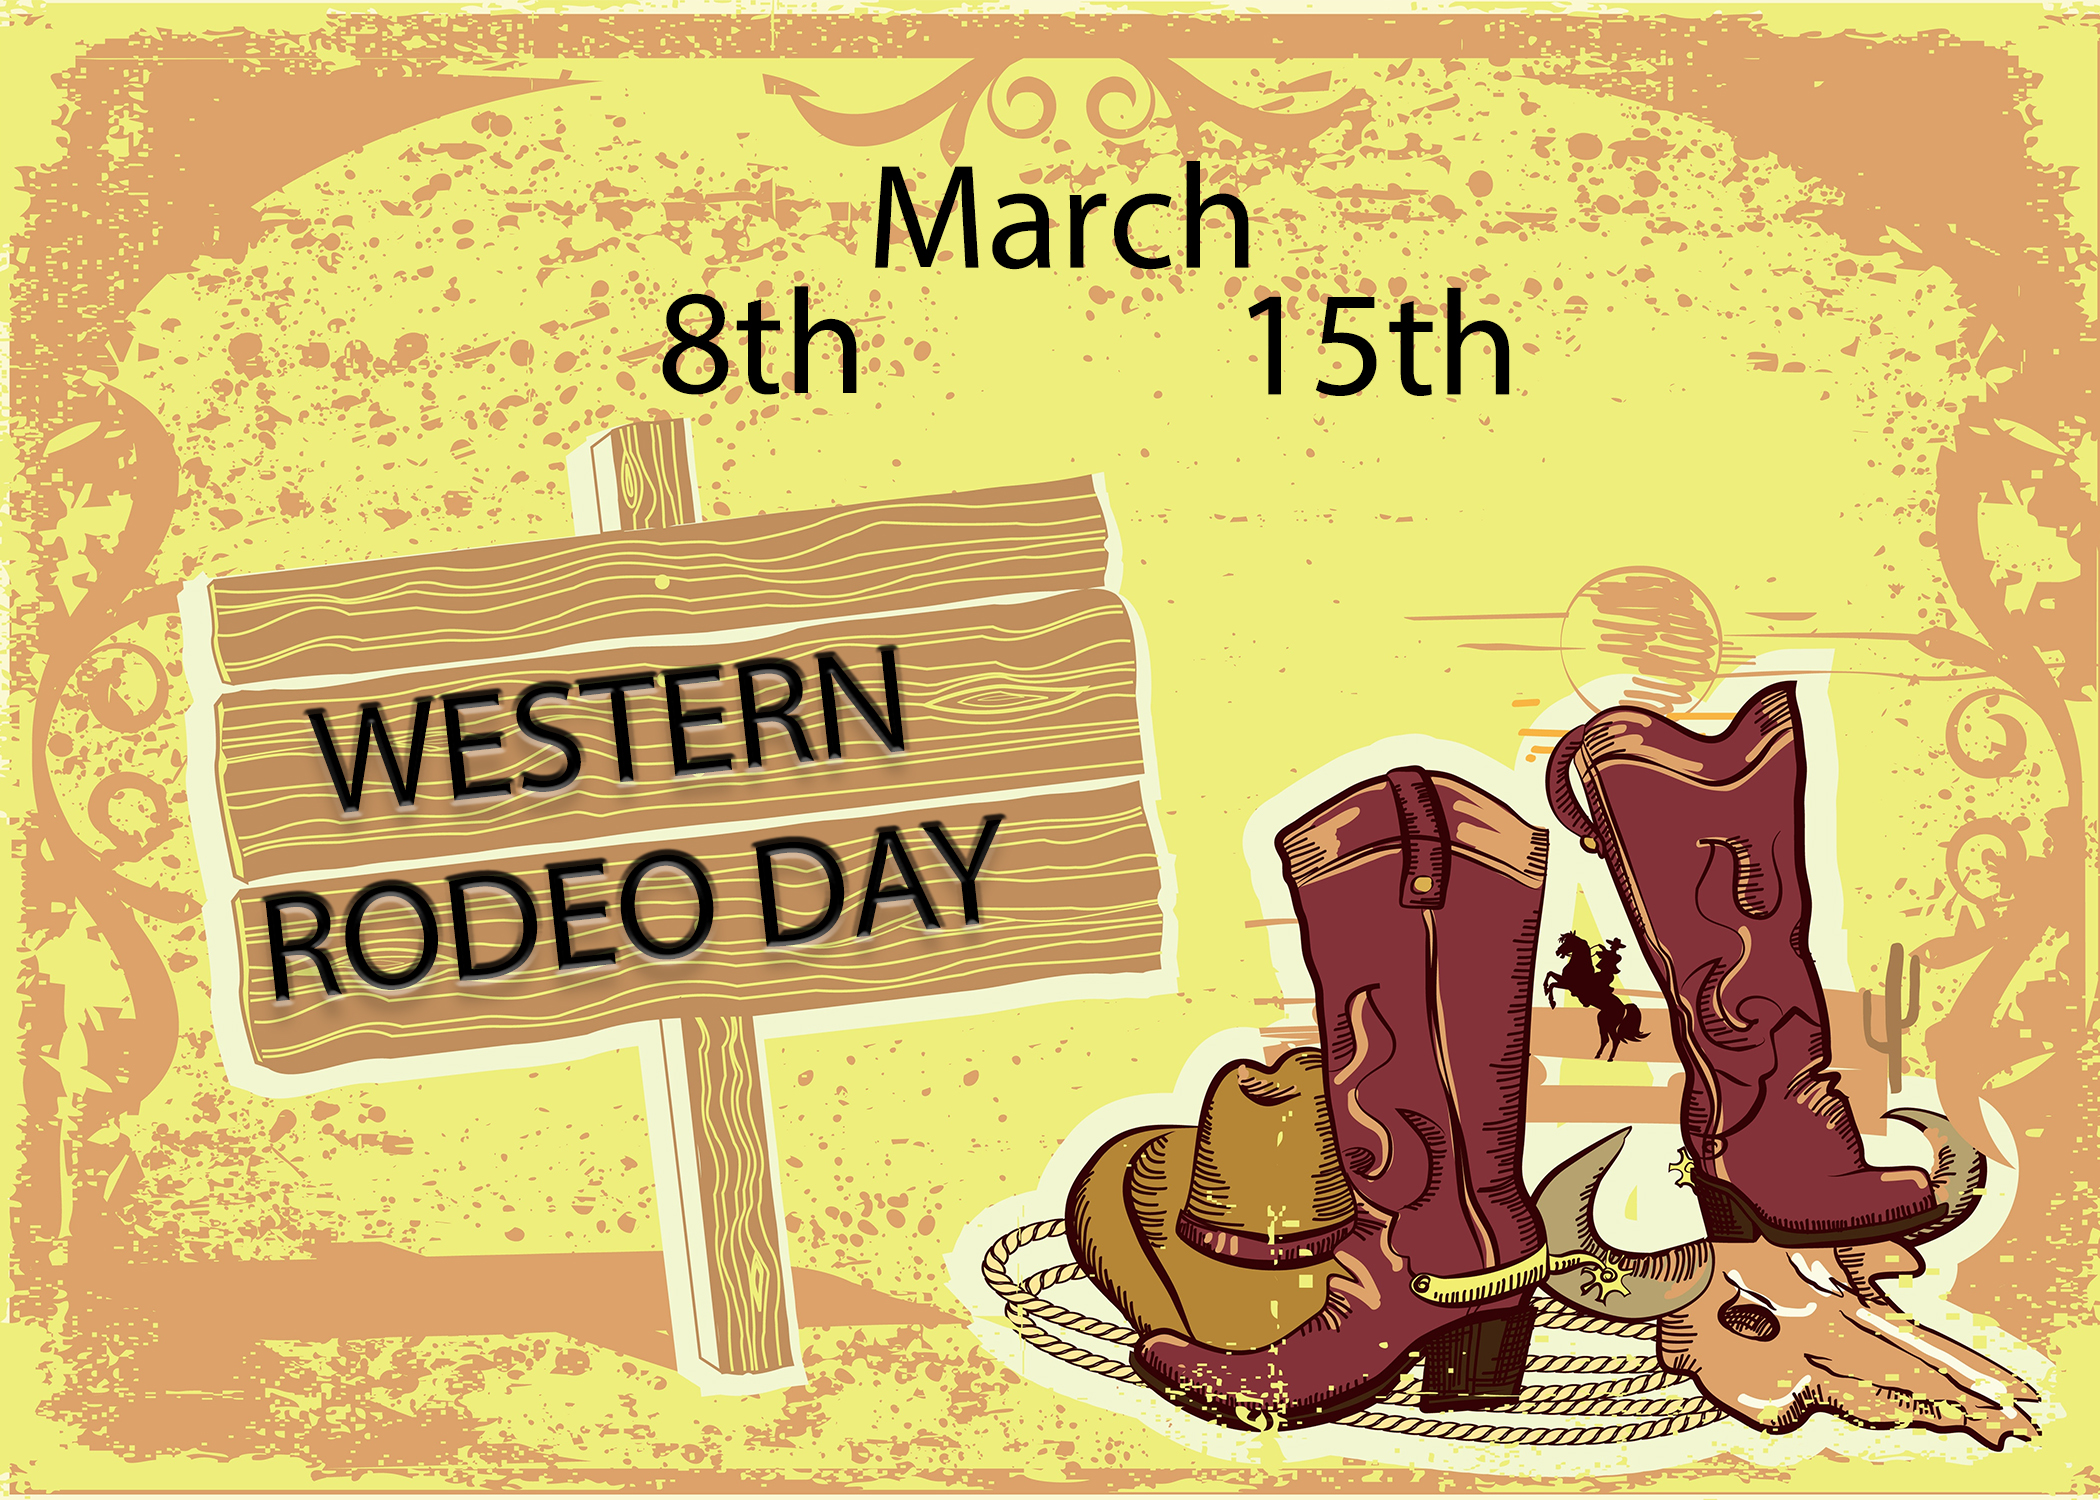 western themed image saying western rodeo day